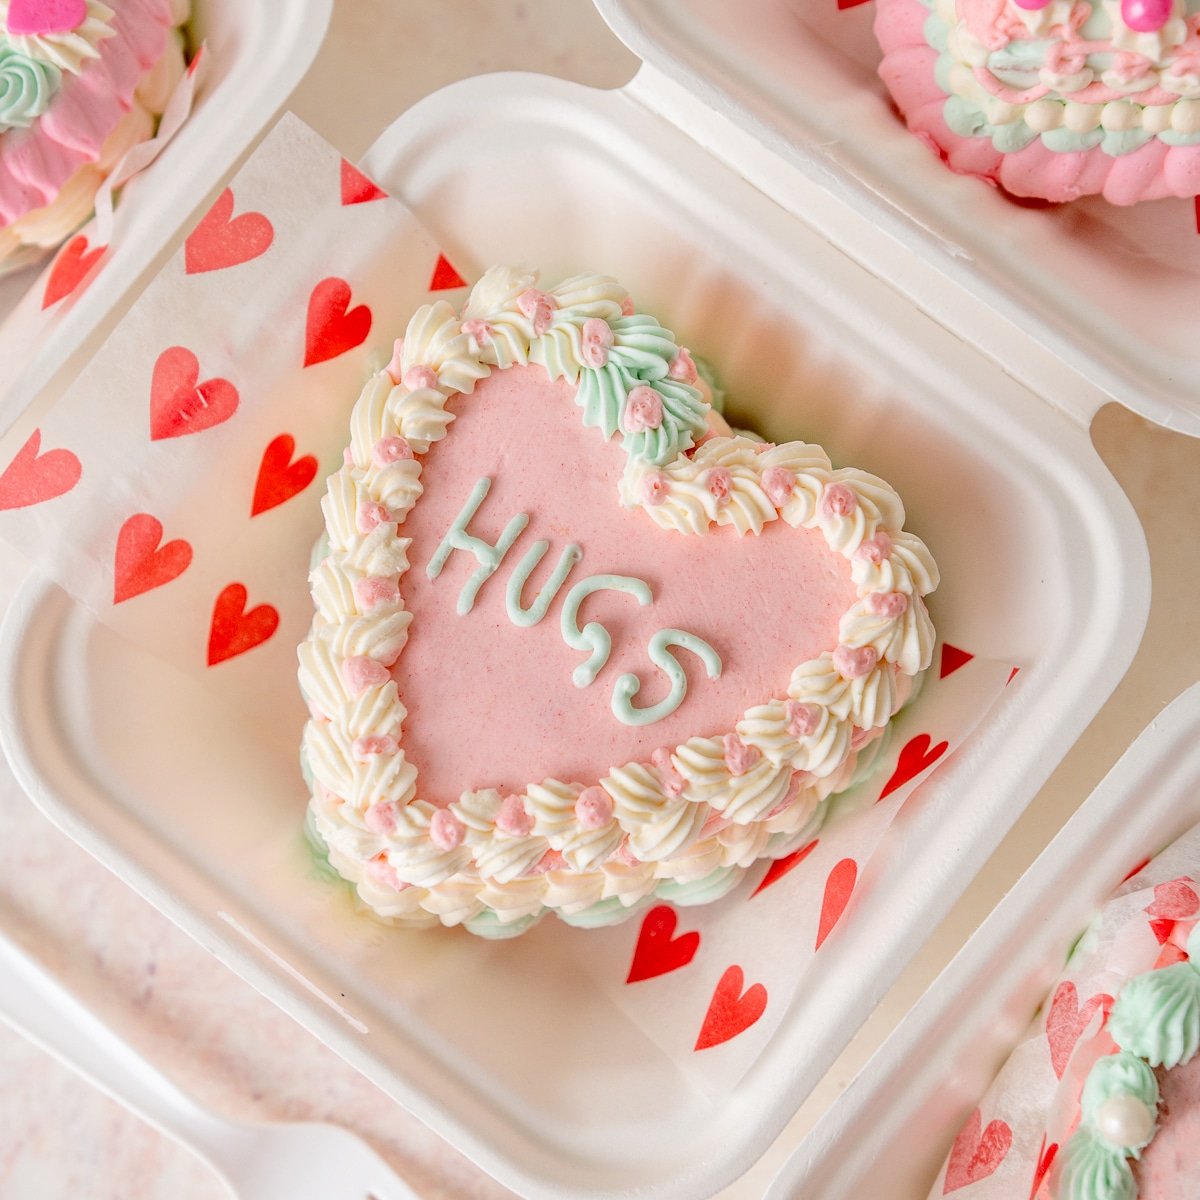 heart shaped cake in a to go box